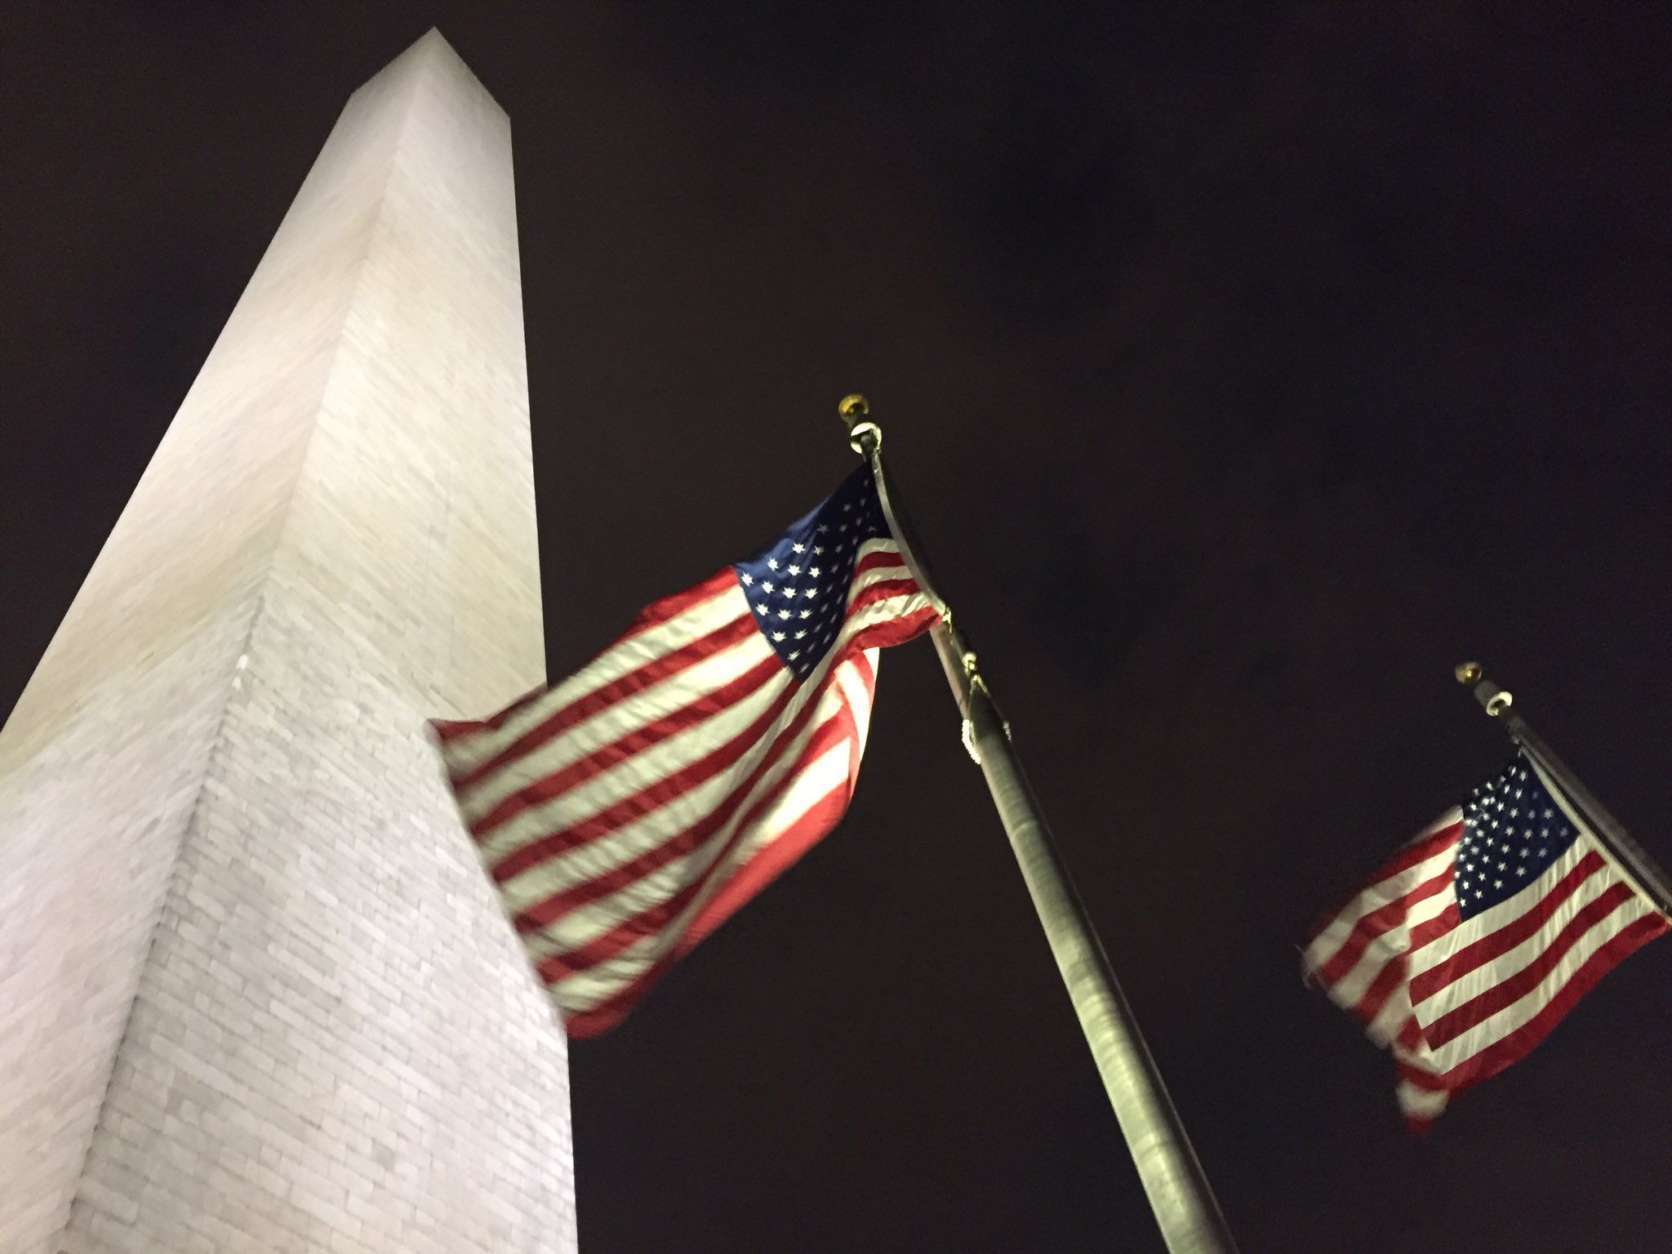 A radiant Washington Monument shines on a festive holiday evening. (WTOP/Michelle Basch)